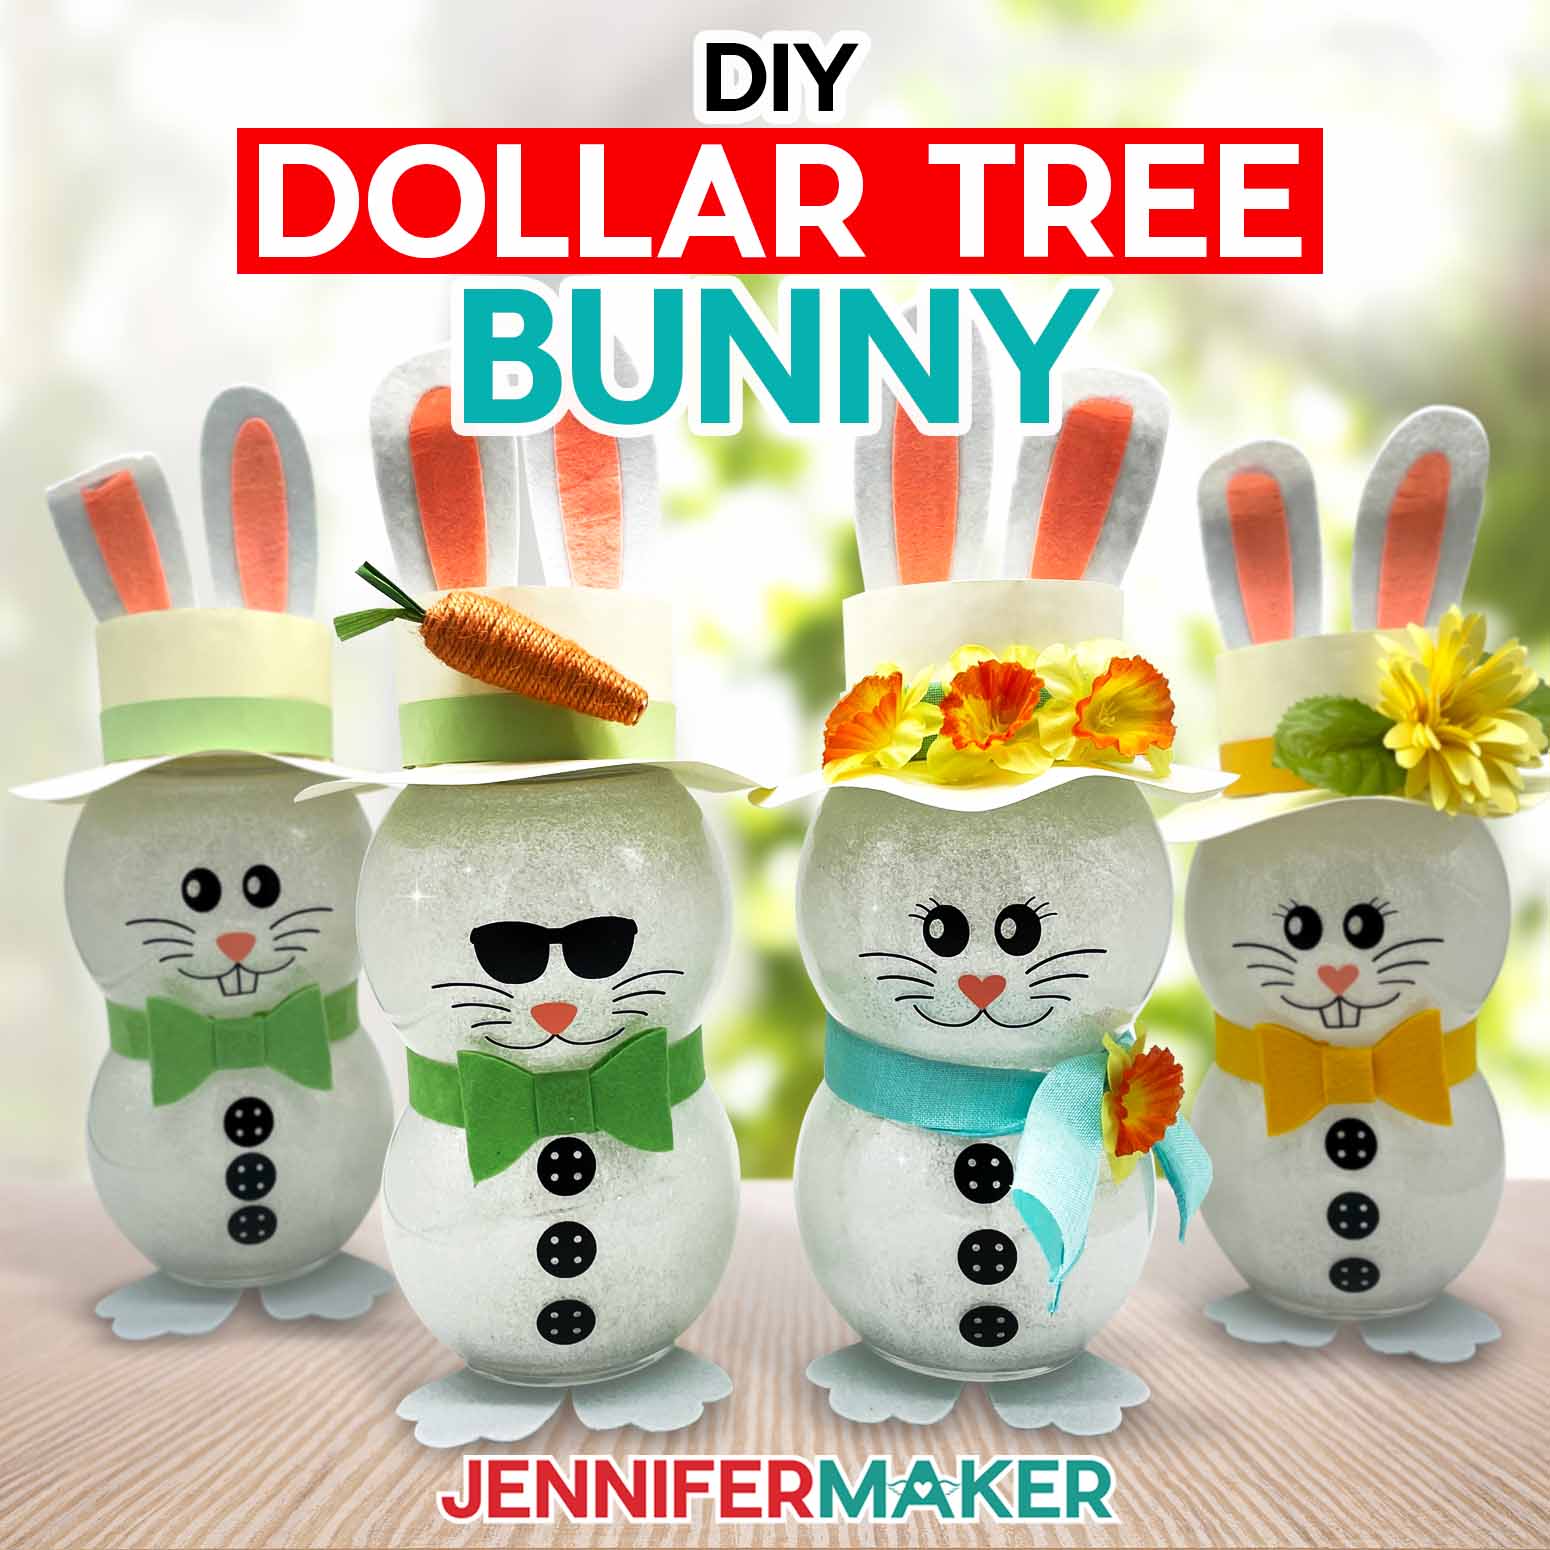 Cute, sparkly, light-up Easter Bunnies made from items from Dollar Tree! Make one under ten dollars with JenniferMaker's DIY Dollar Tree Bunny for Easter tutorial.